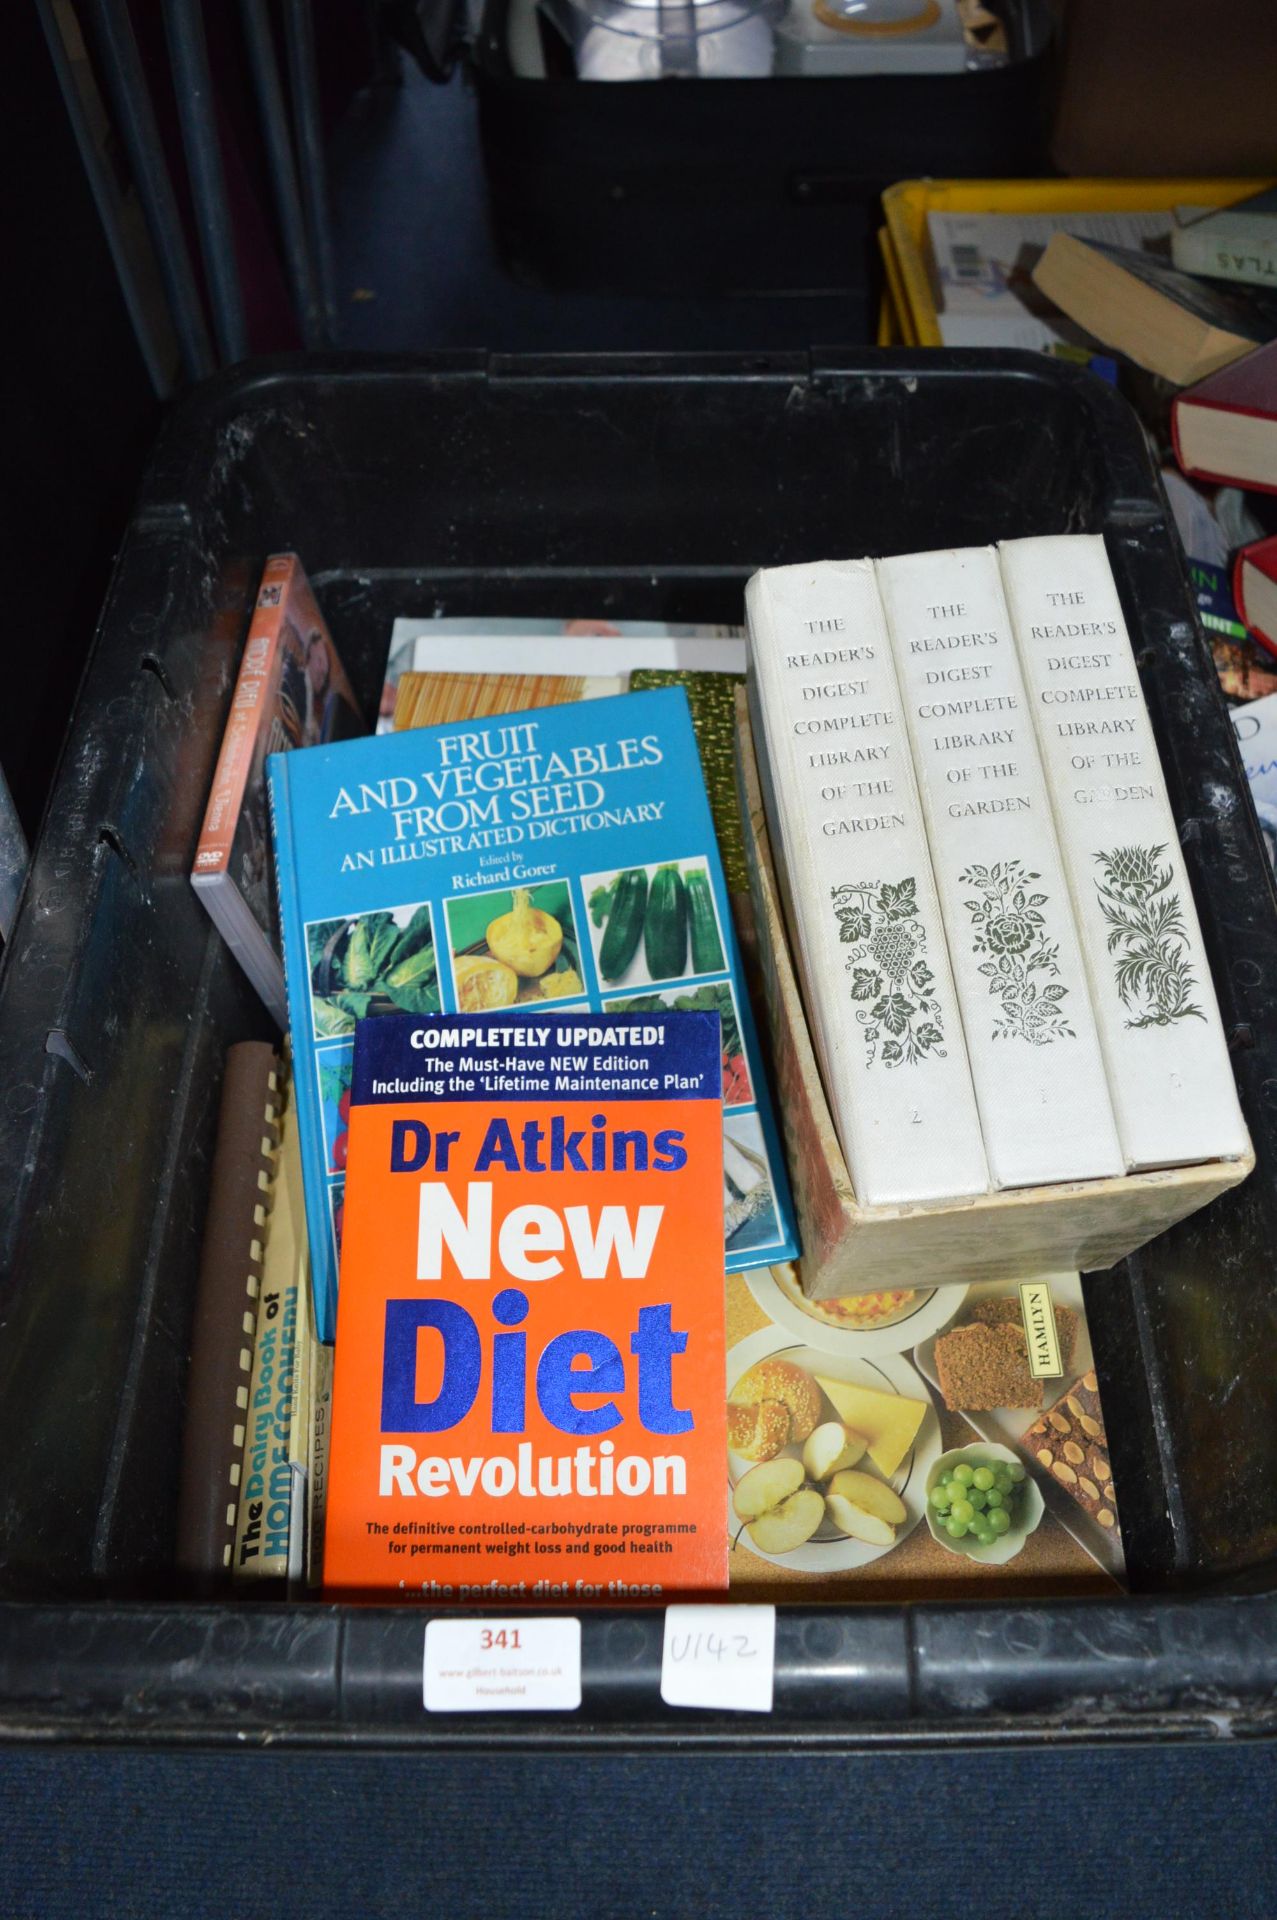 Large Tub of Books on Cookery etc.